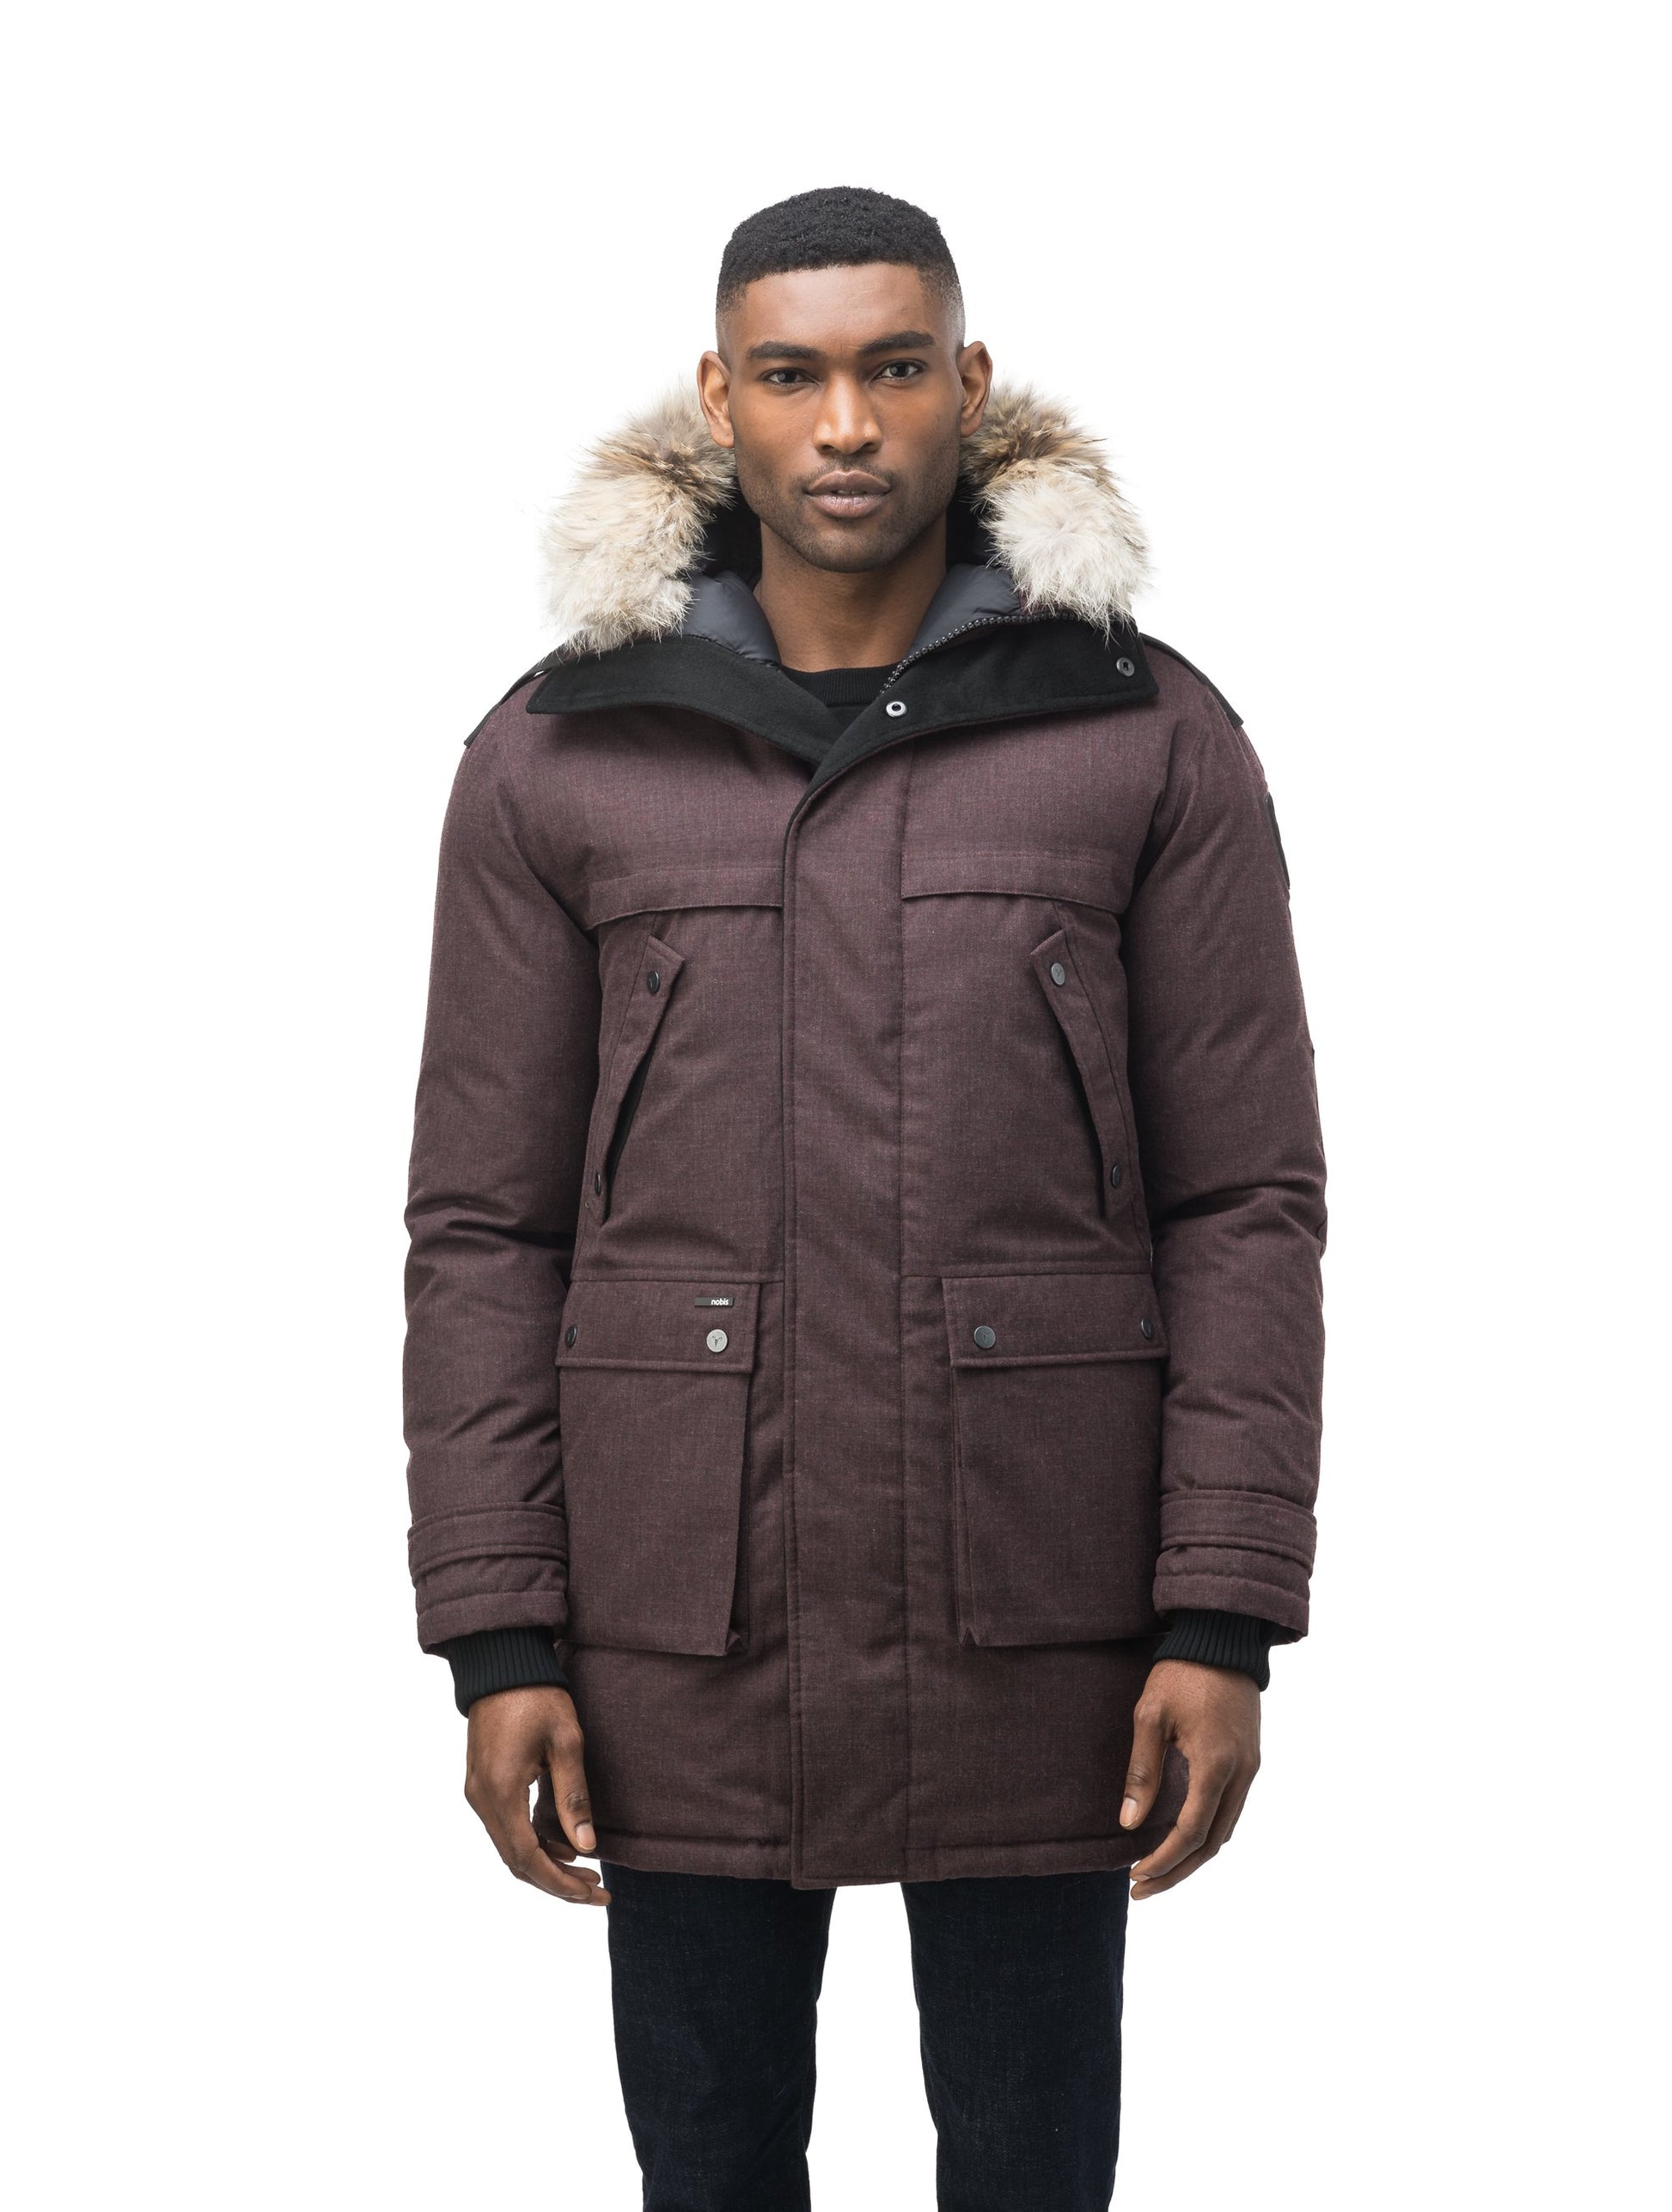 Men's Best Selling Parka the Yatesy is a down filled jacket with a zipper closure and magnetic placket in H. Burgundy